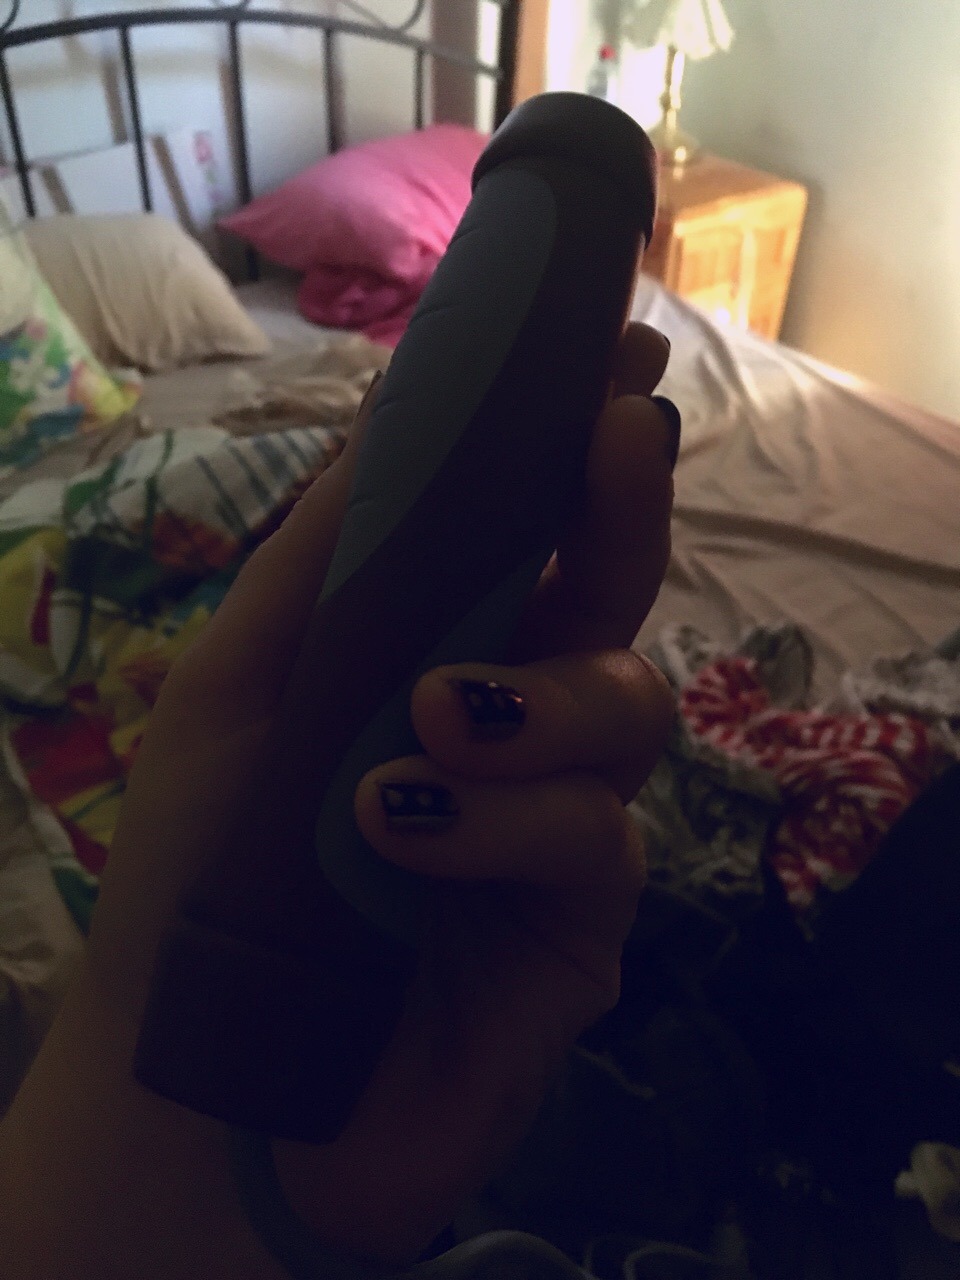 babygirrll8971:  I am thinking about buying a small butt plug and small dildo, any